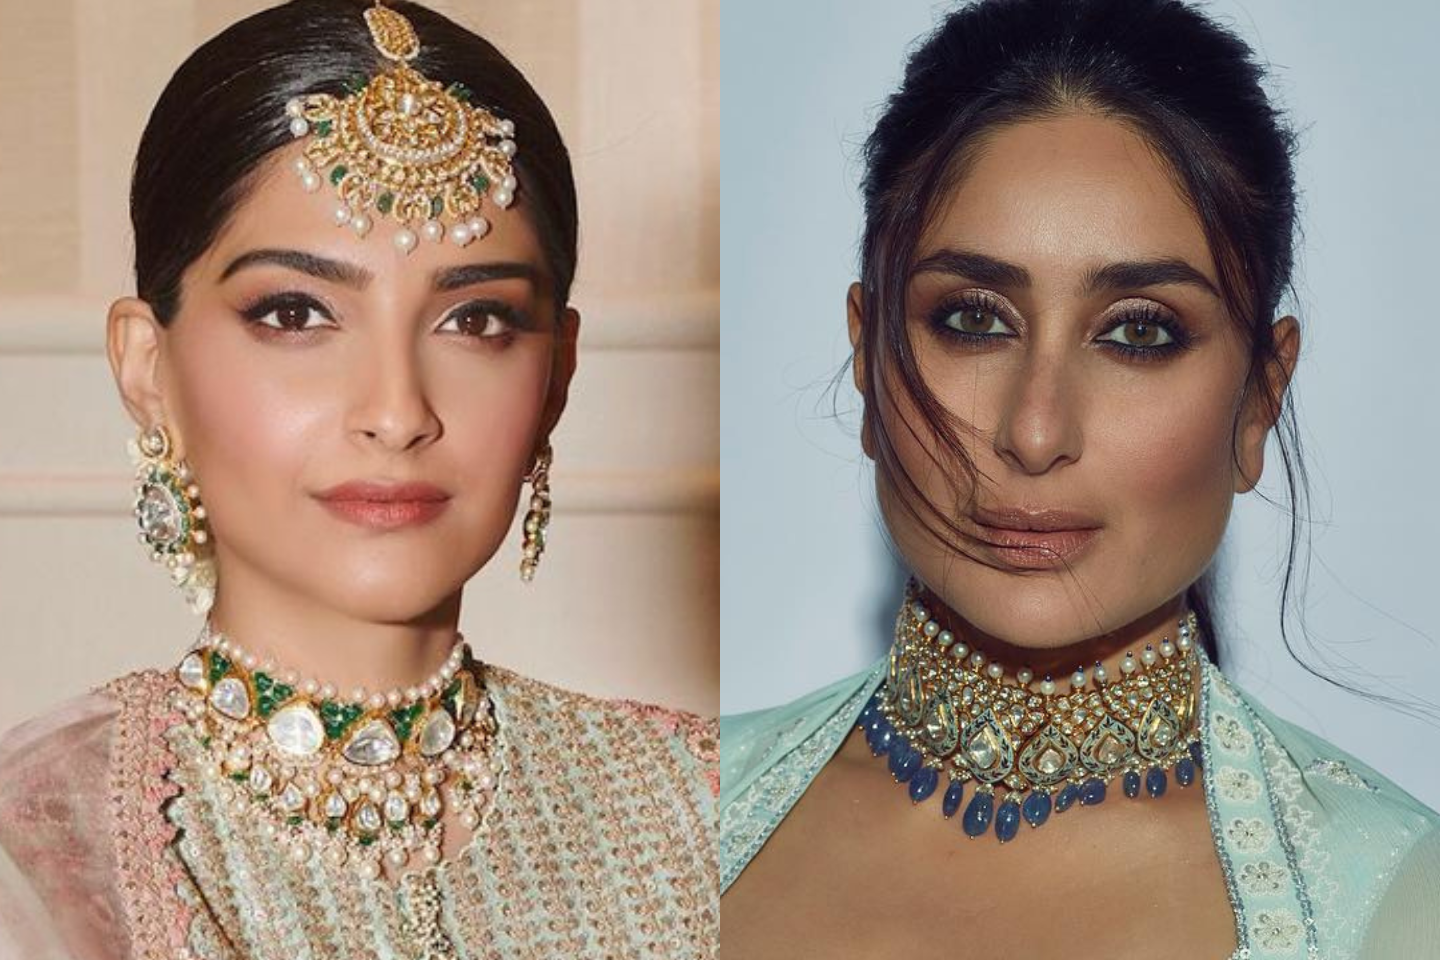 Attending a Wedding? Style Your Indian Wedding Jewelry Like These Bollywood Beauties Did!